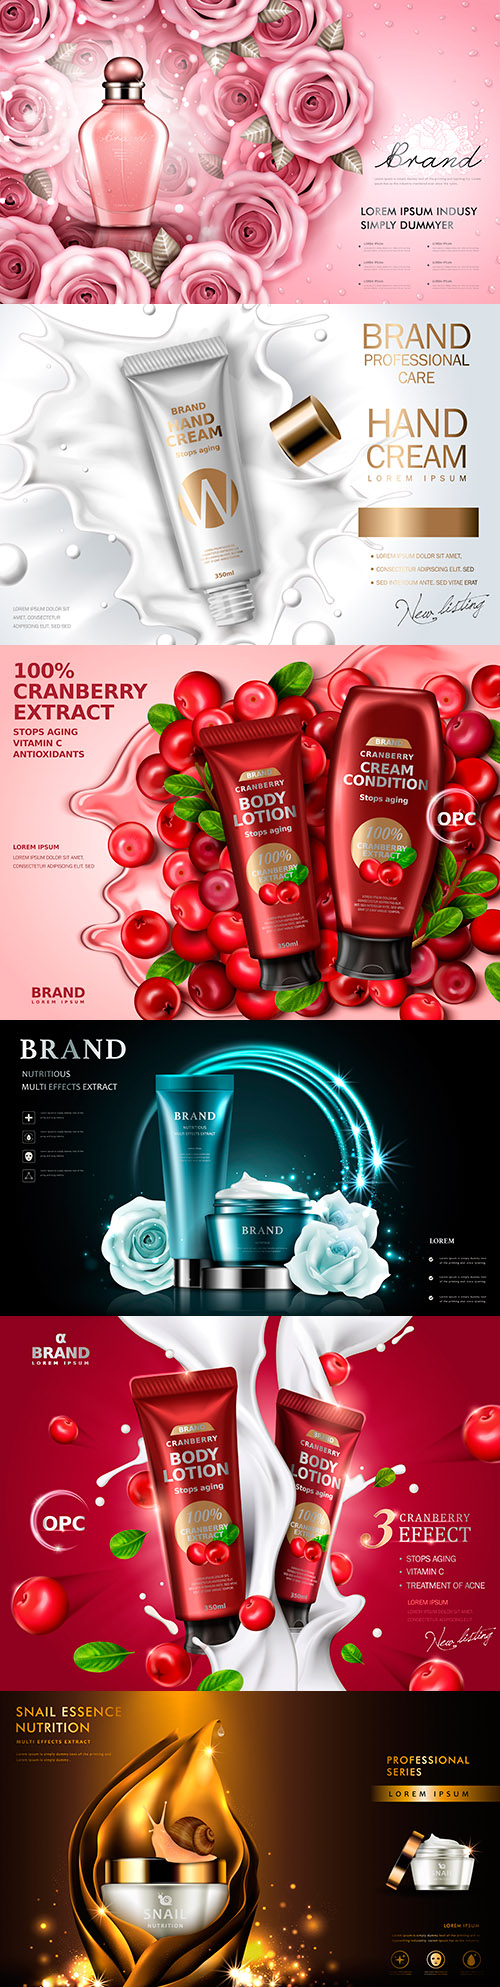 Cosmetics kit and perfume water advertising realistic design
